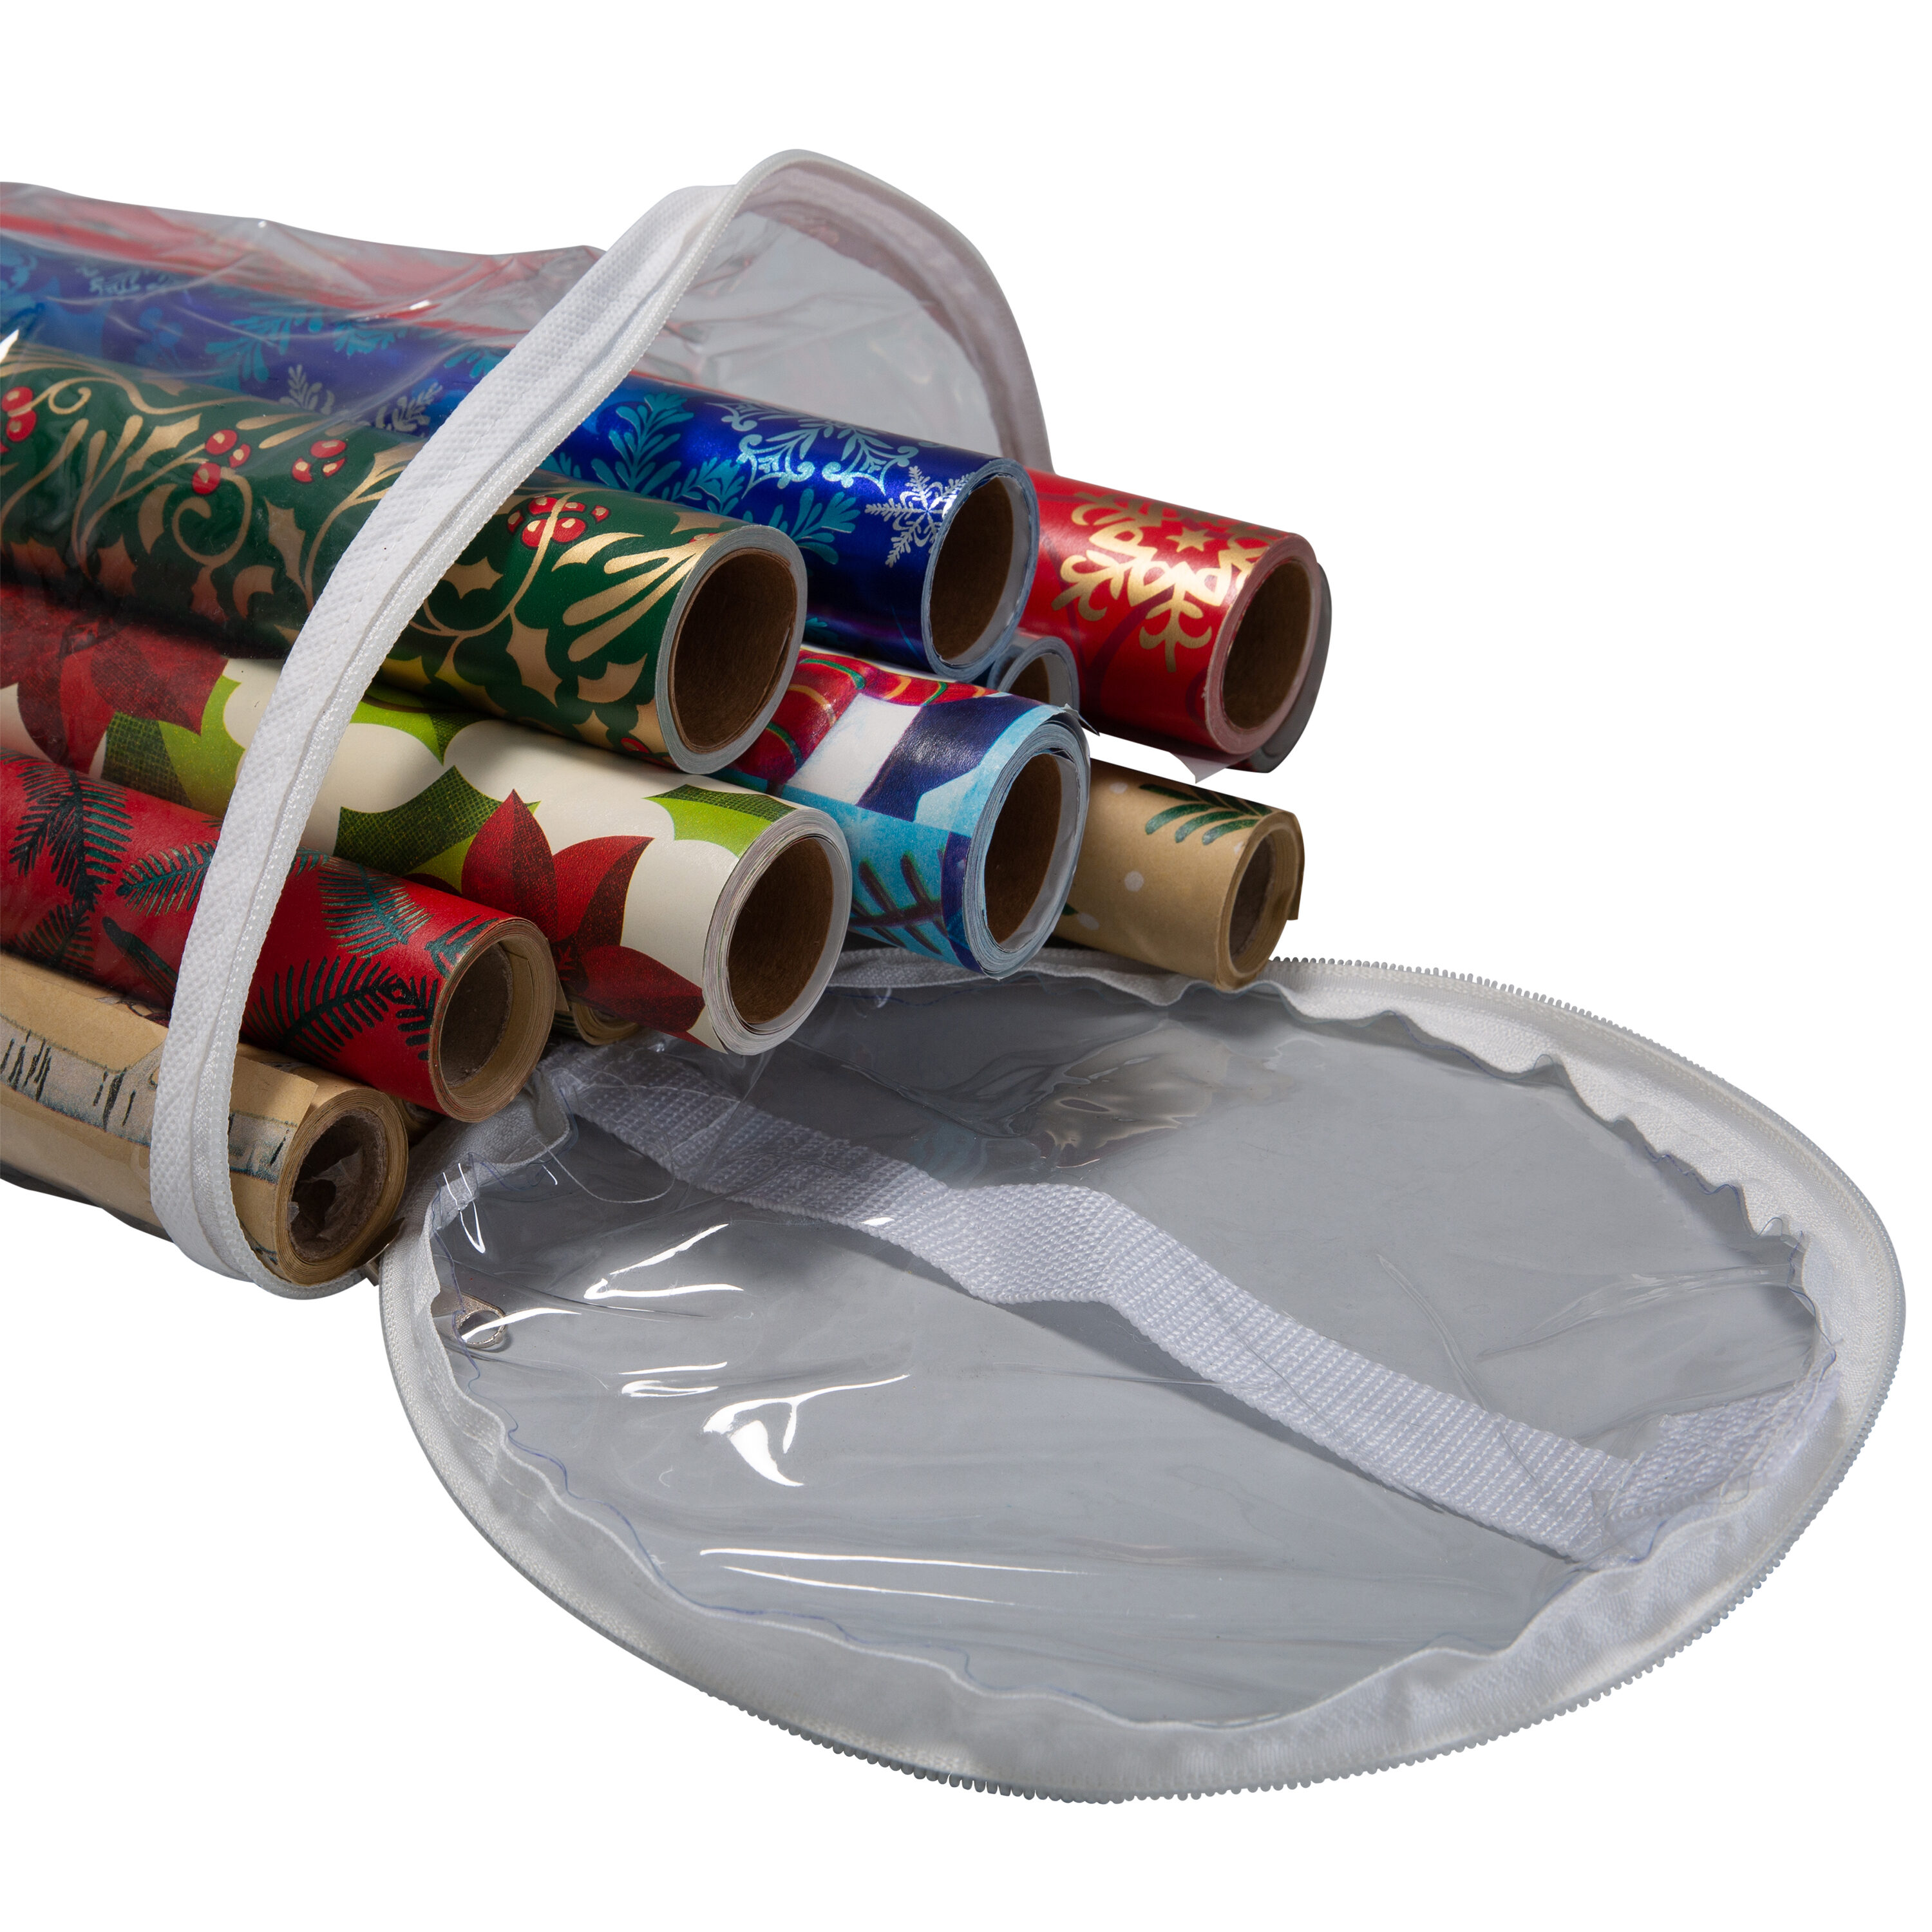 CLEAR GIFT WRAP STORAGE BAG ORGANISER CHRISTMAS CYLINDER STORAGE WRAPPING  PAPER